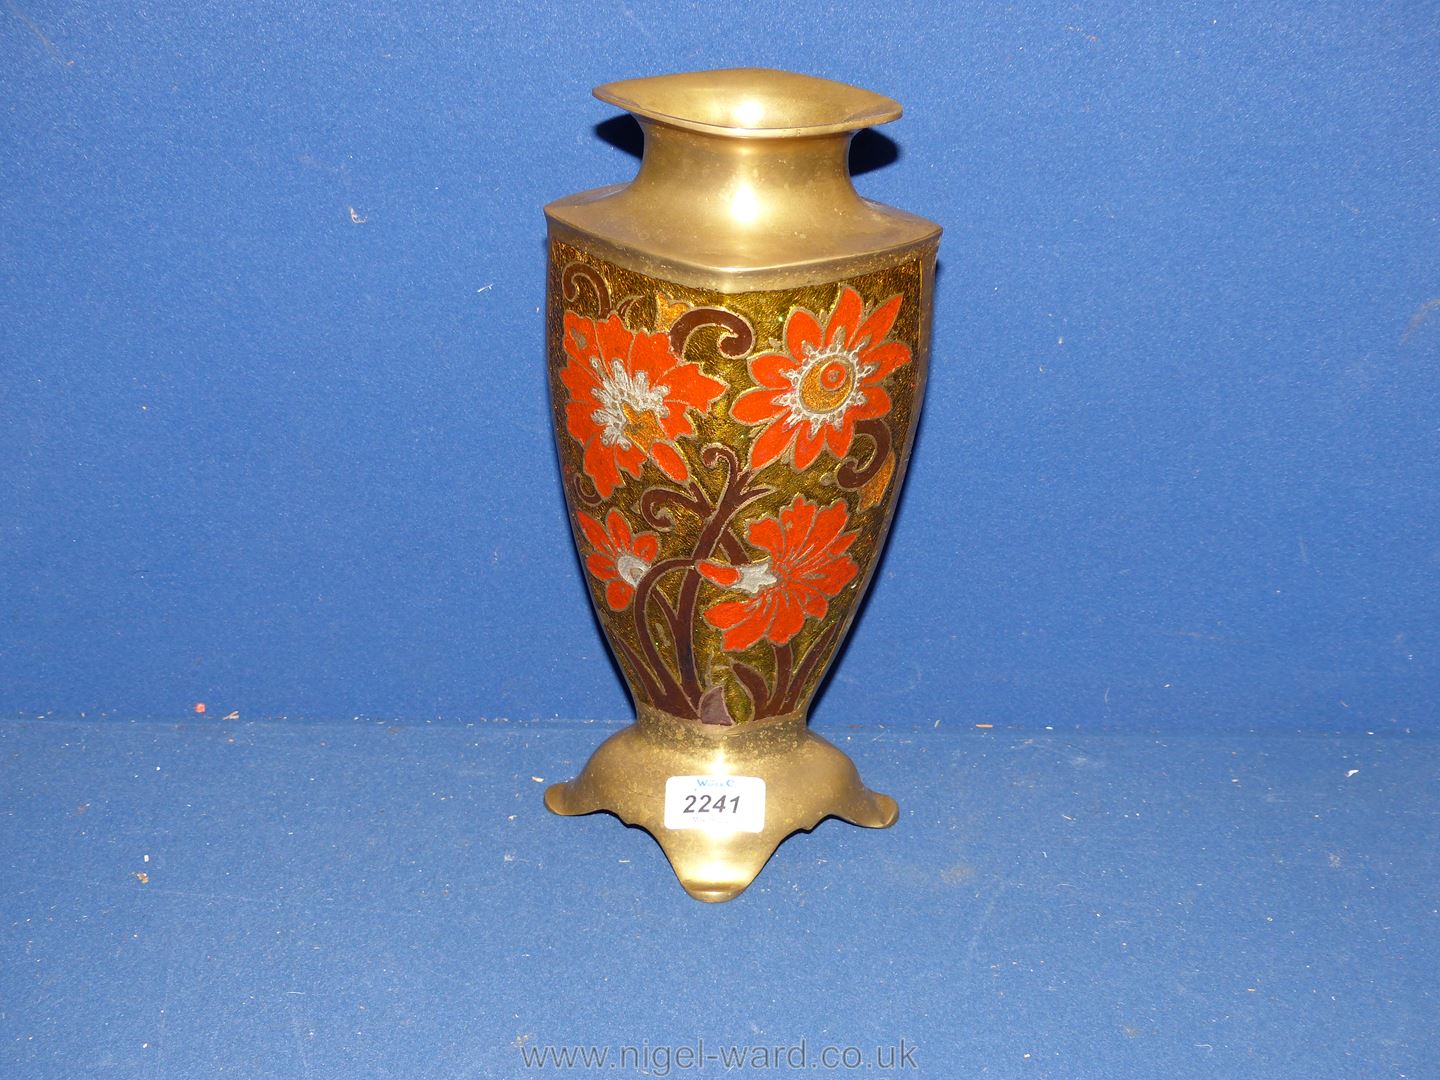 A tall enameled brass Vase, decorated with red flowers. 11 1/2" tall.